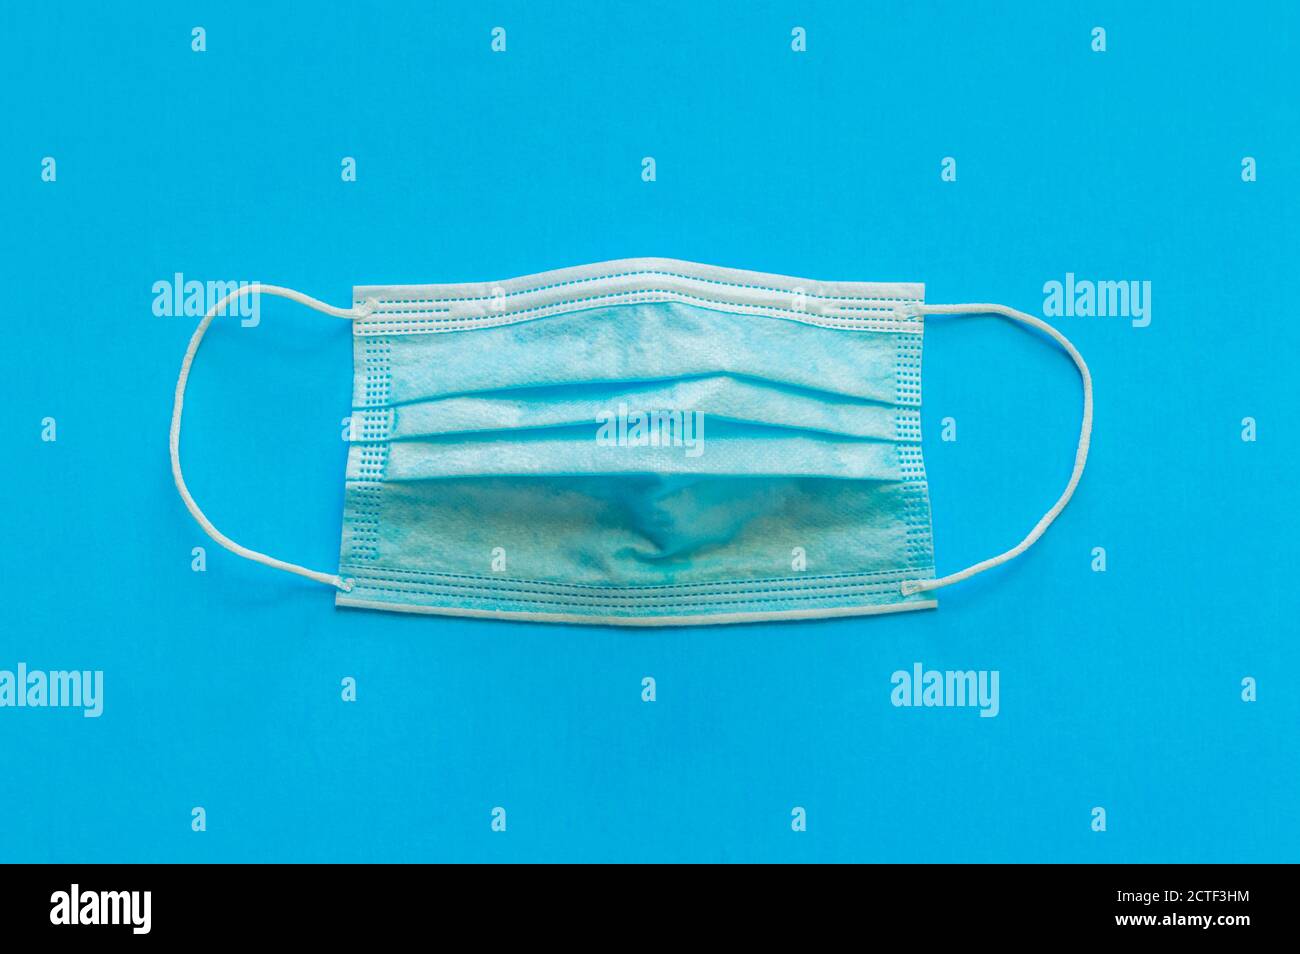 A blue medical face mask is isolated on a blue background Stock Photo